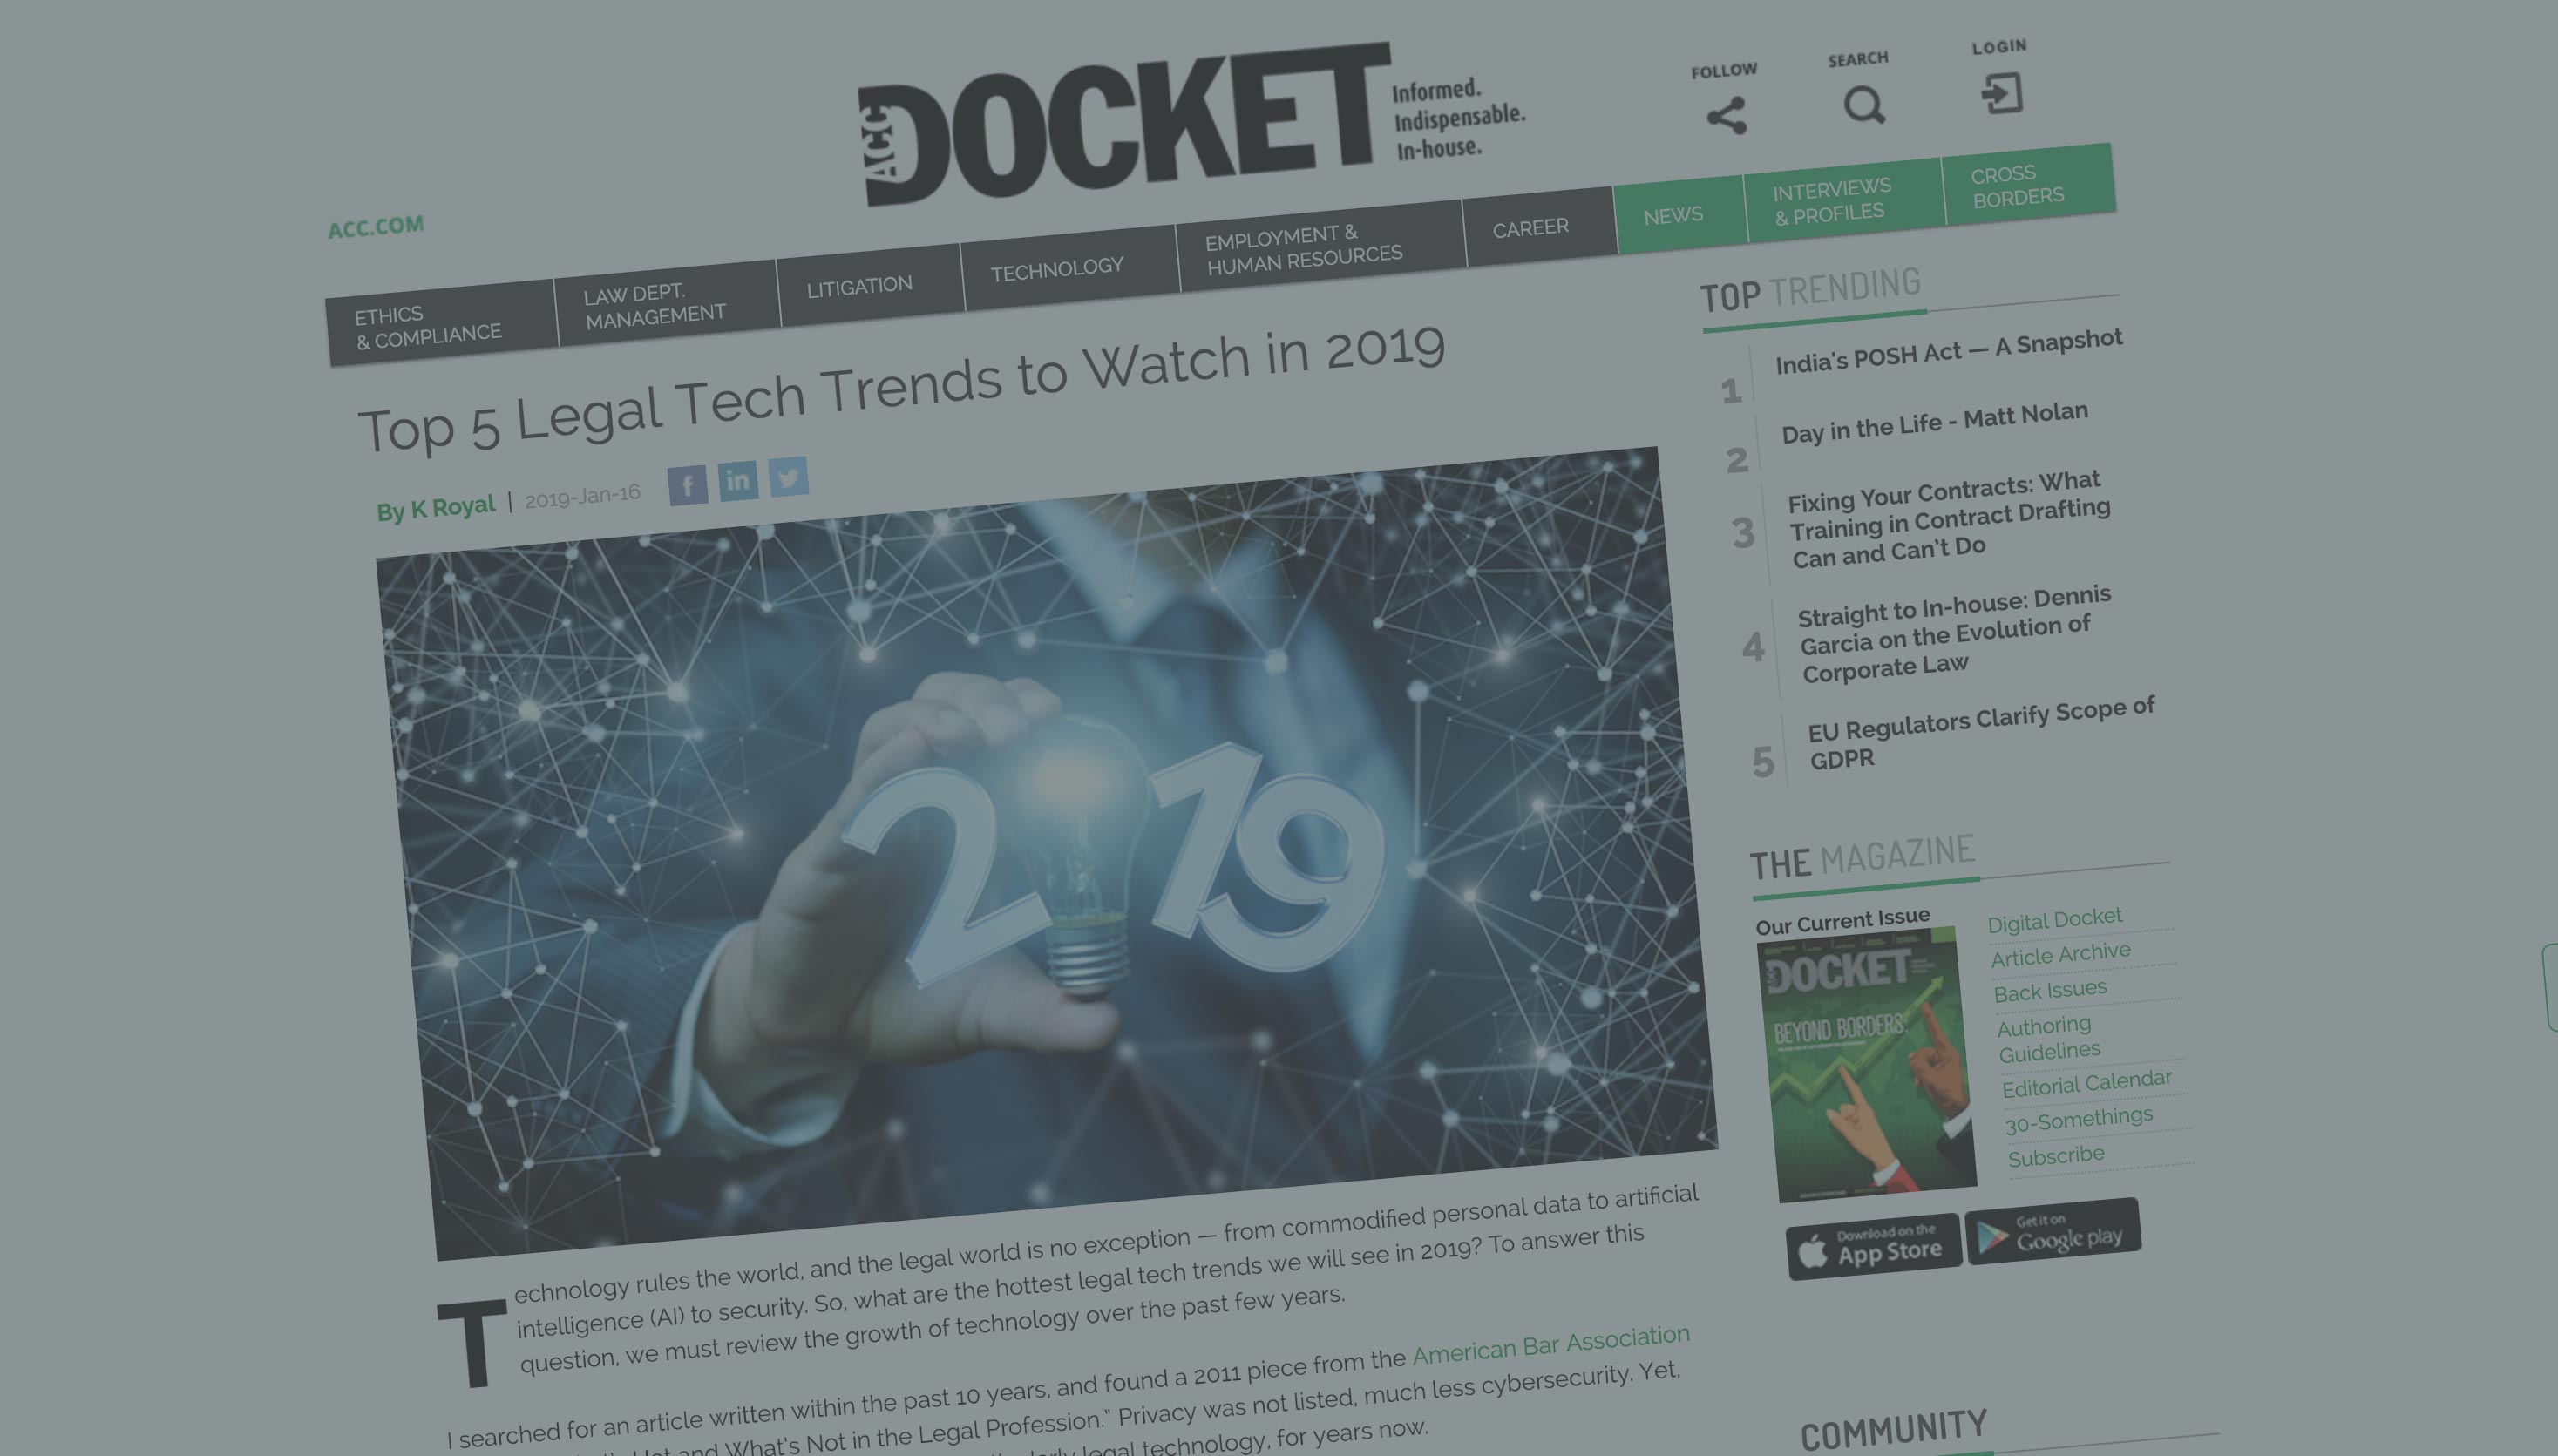 Top 5 Legal Tech Trends to Watch in 2019